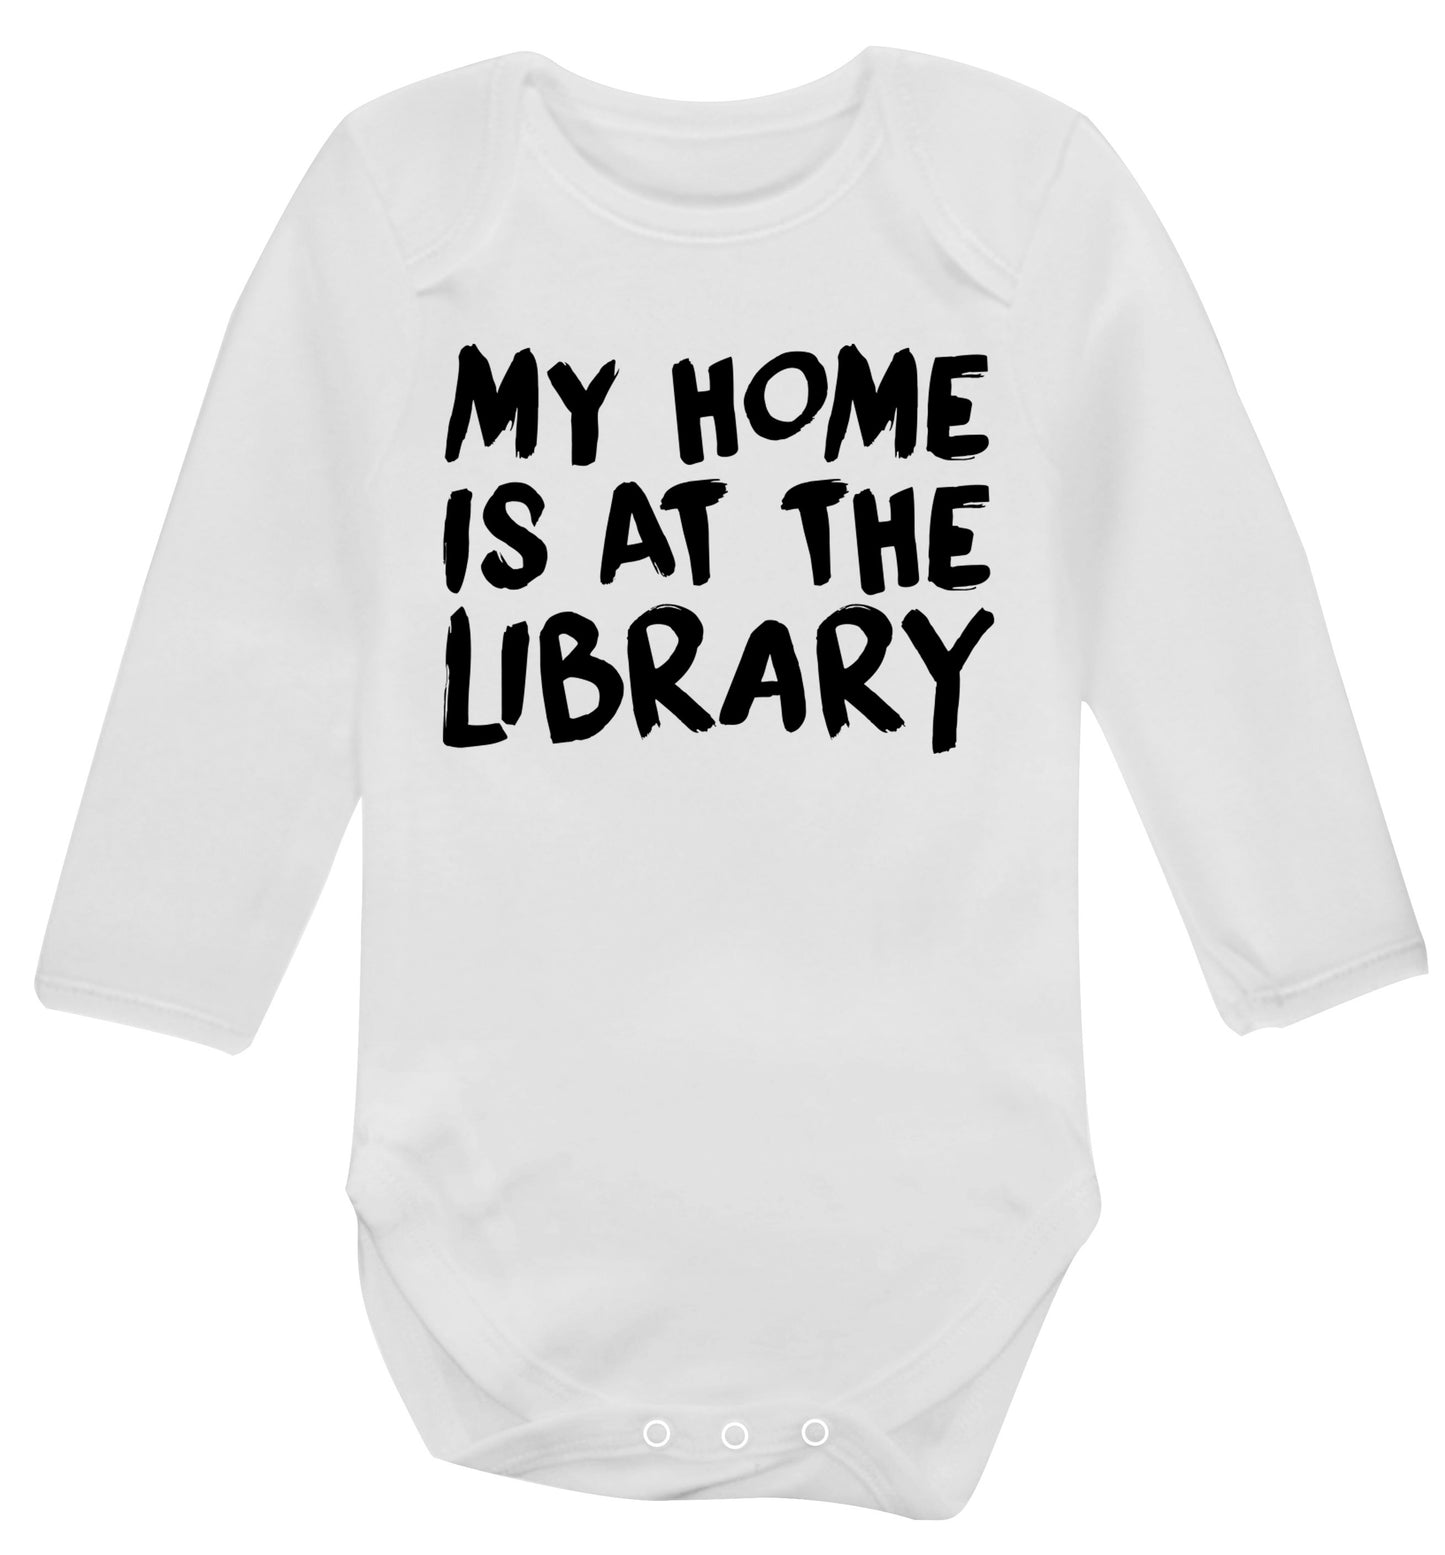 My home is at the library Baby Vest long sleeved white 6-12 months